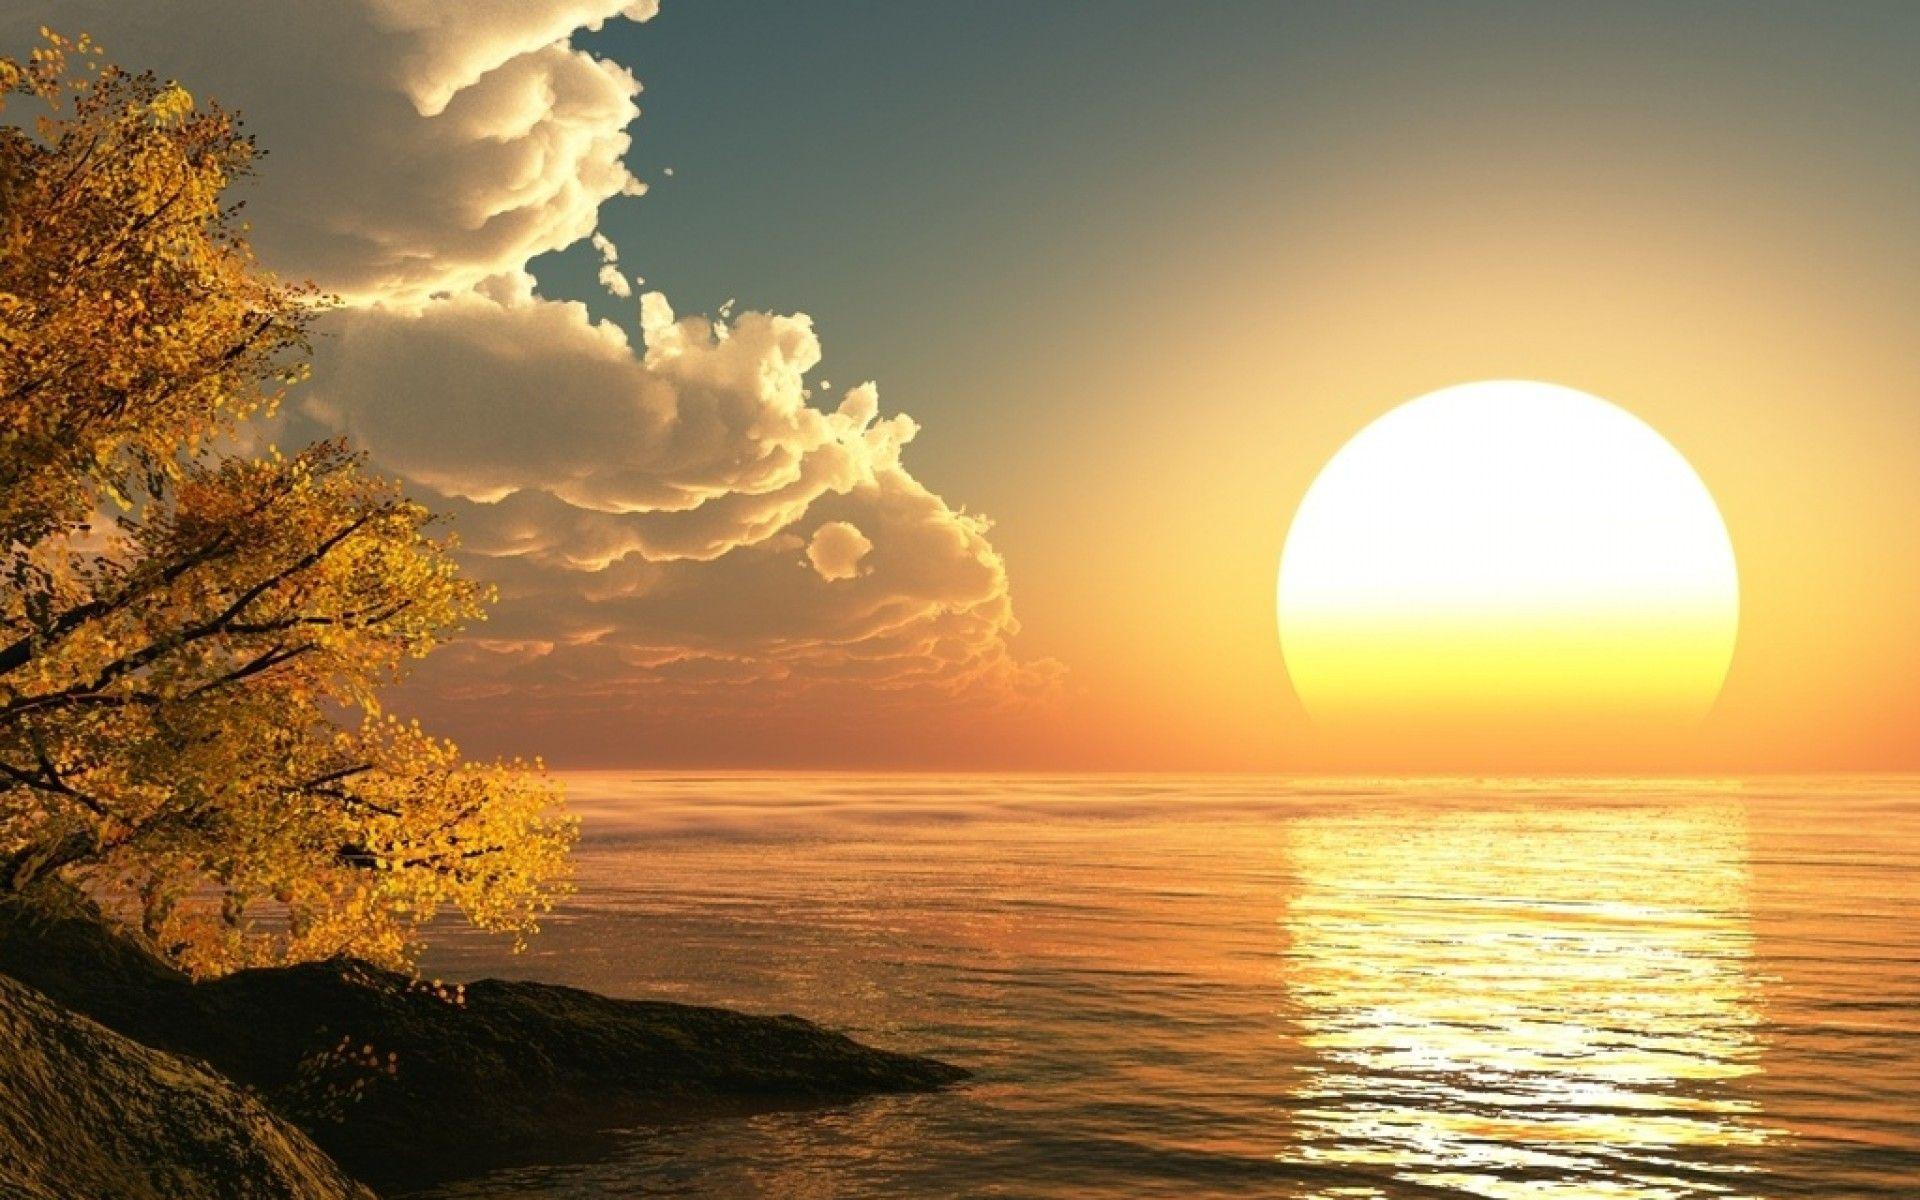 awesome place HD Sunrise Wallpaper